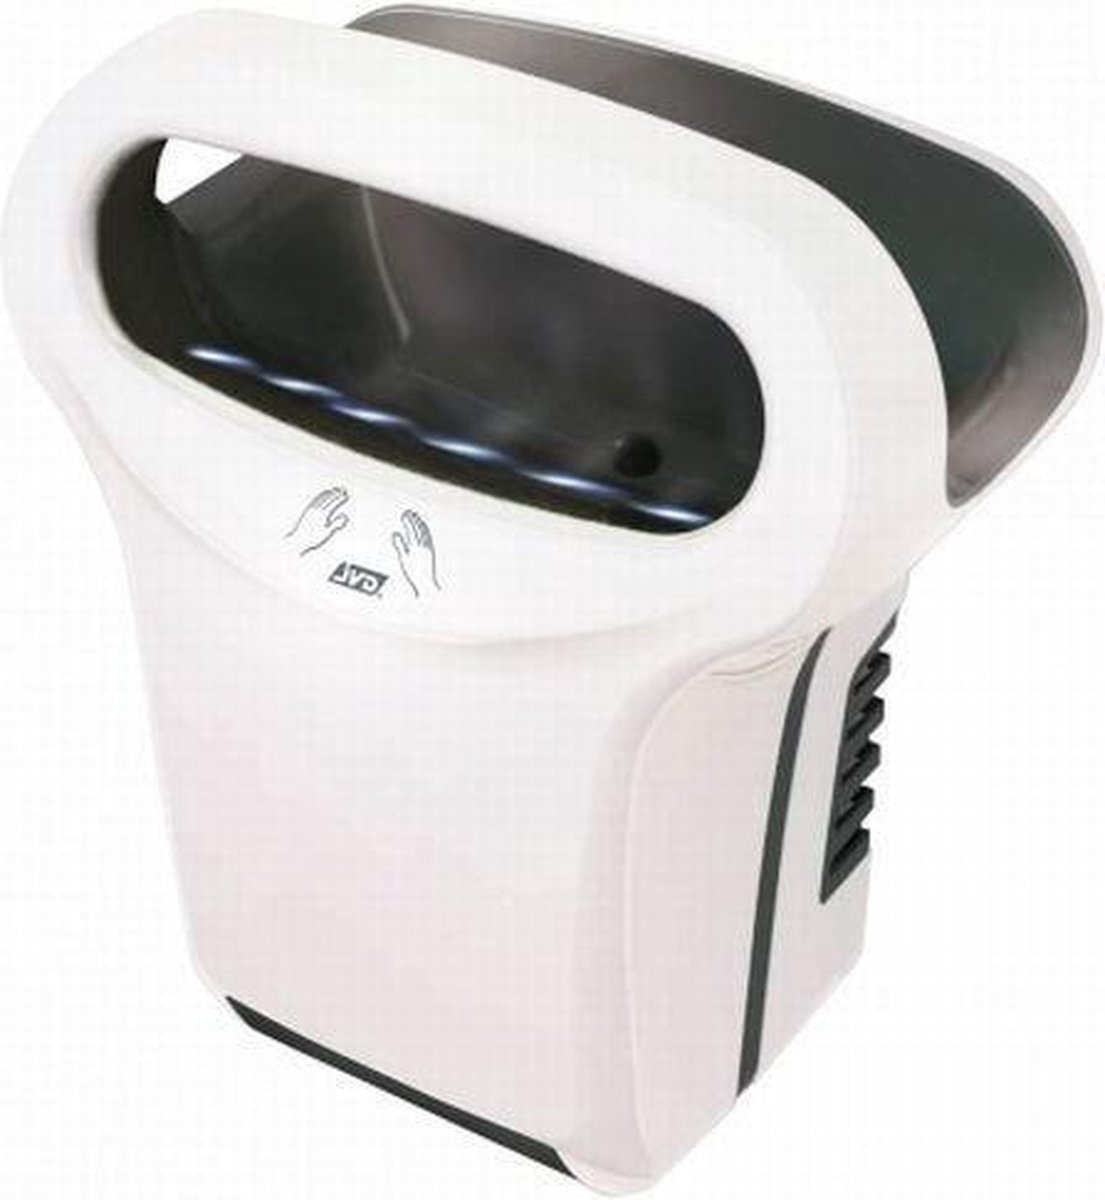 JVD Exp´Air automatic 800 W hand dryer in 3 colors